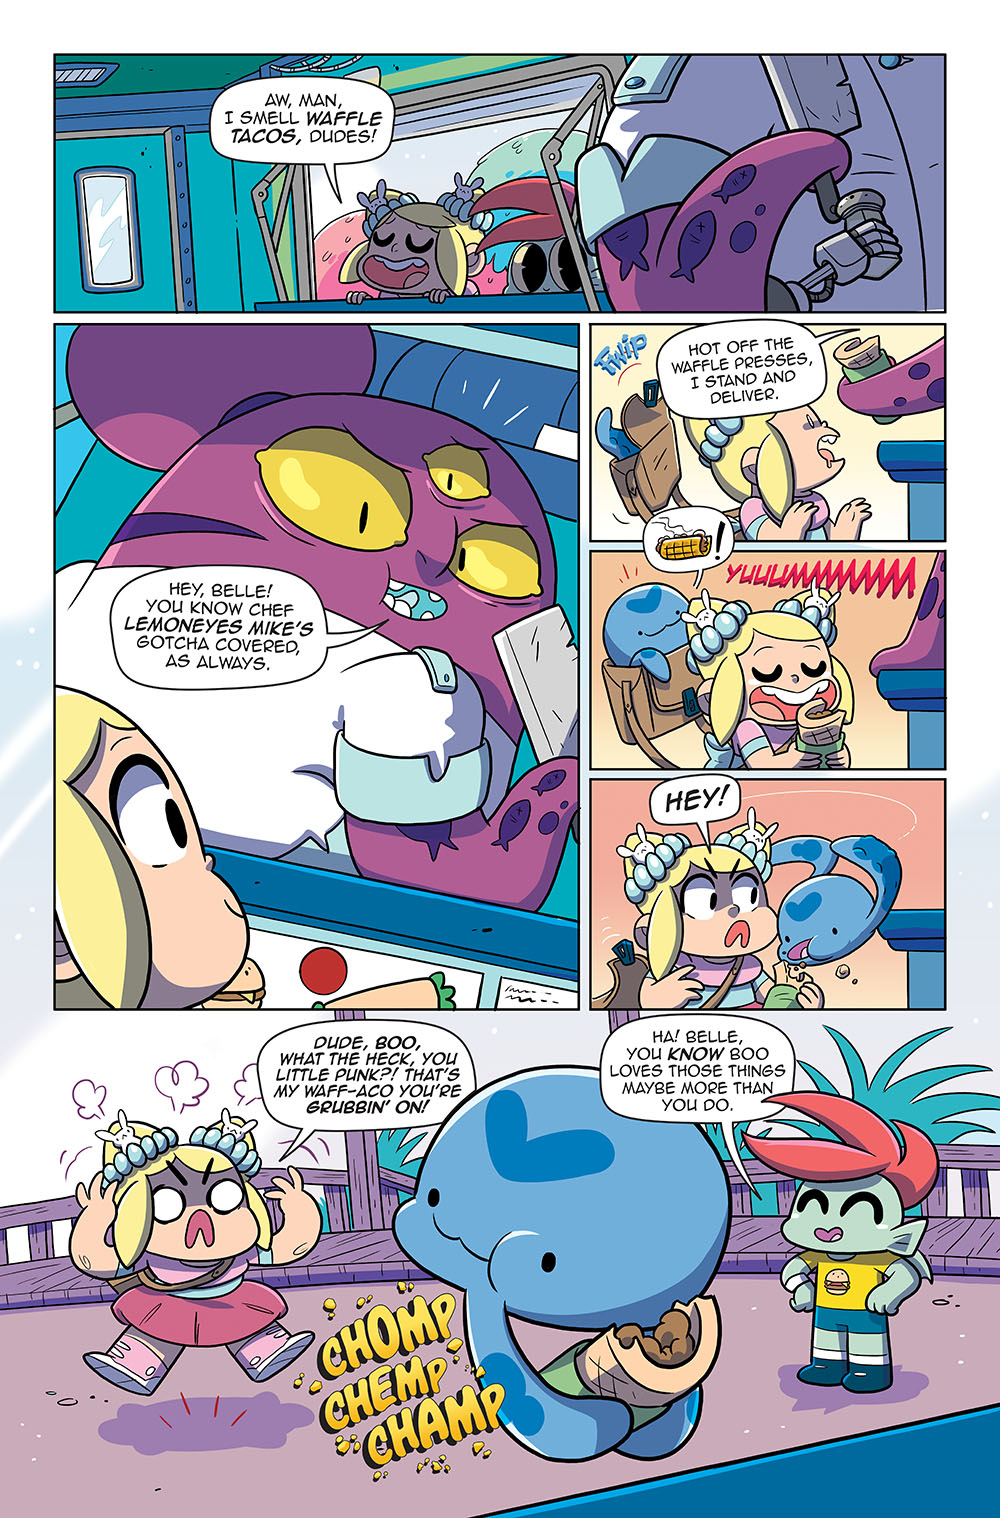 Read The Wacky, Hilarious First Issue Of Welcome To Showside Here For Free